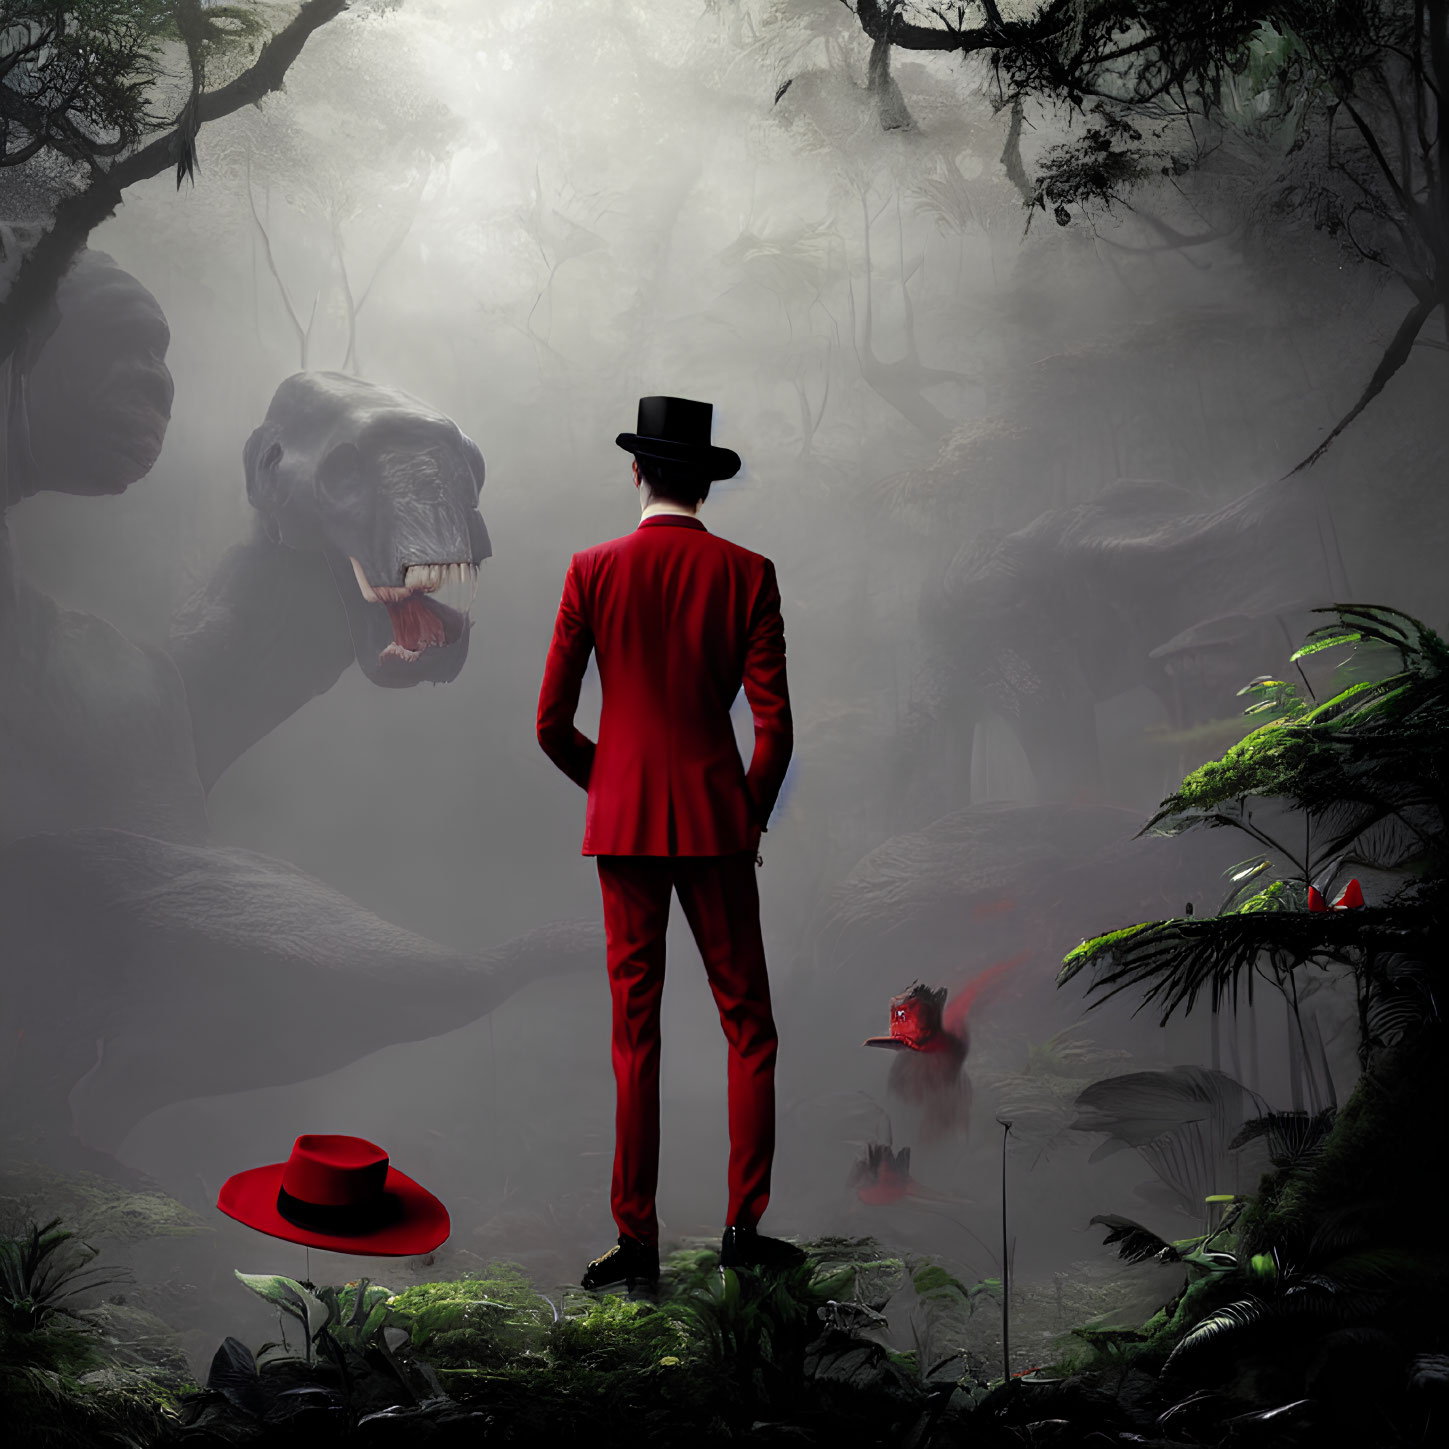 Person in Red Suit and Black Hat in Misty Jungle with Giant Creatures and Red Frog